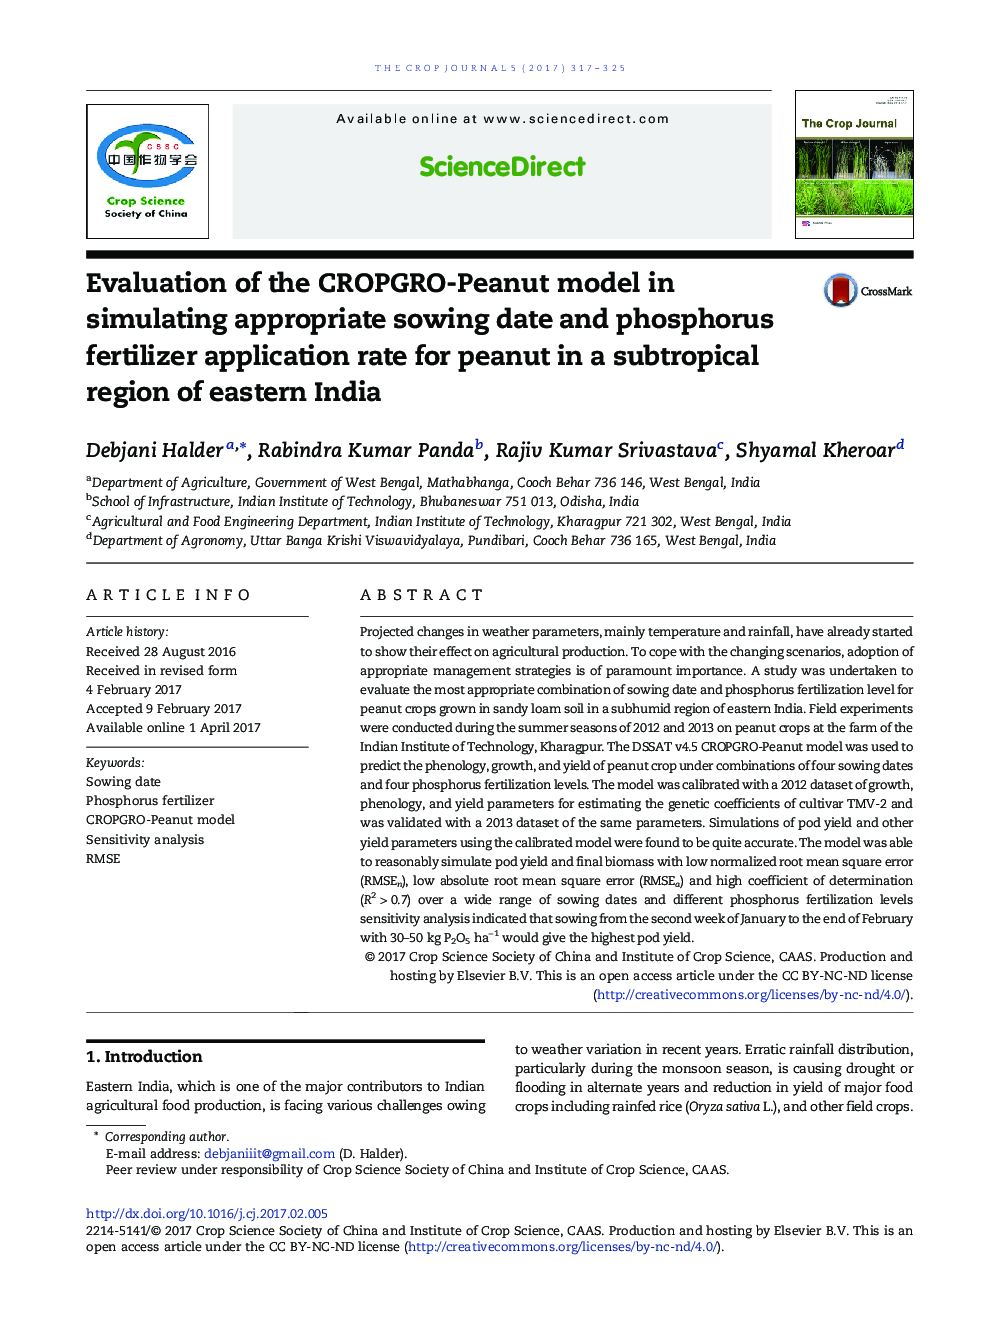 Evaluation of the CROPGRO-Peanut model in simulating appropriate sowing date and phosphorus fertilizer application rate for peanut in a subtropical region of eastern India